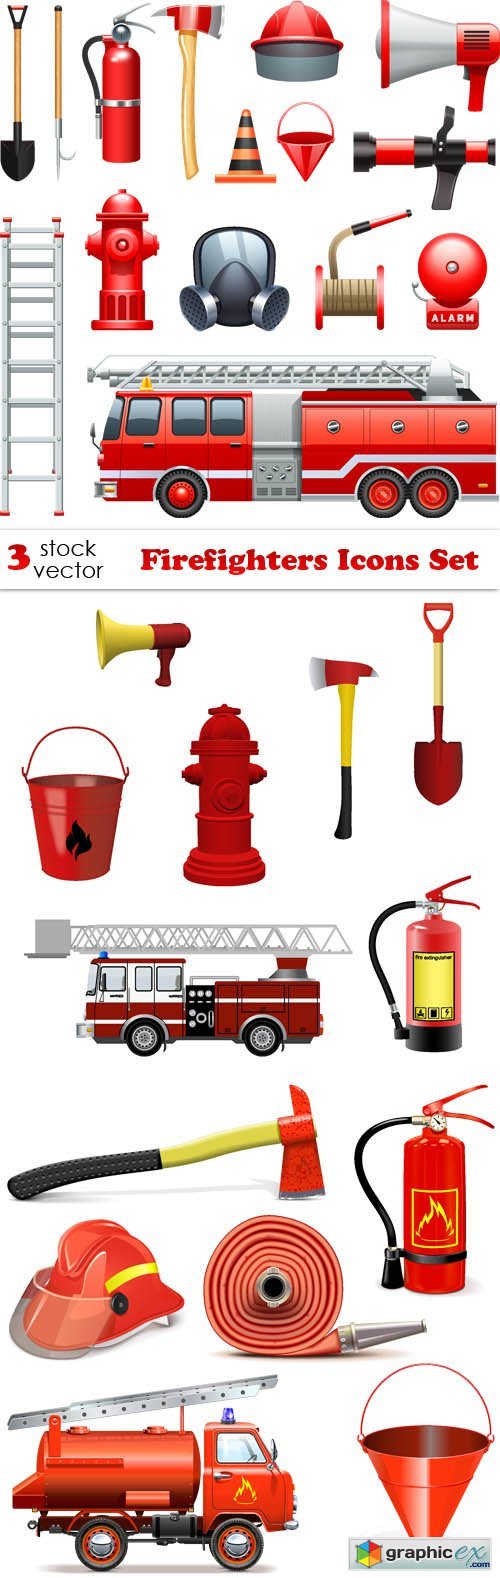 Firefighters Icons Set